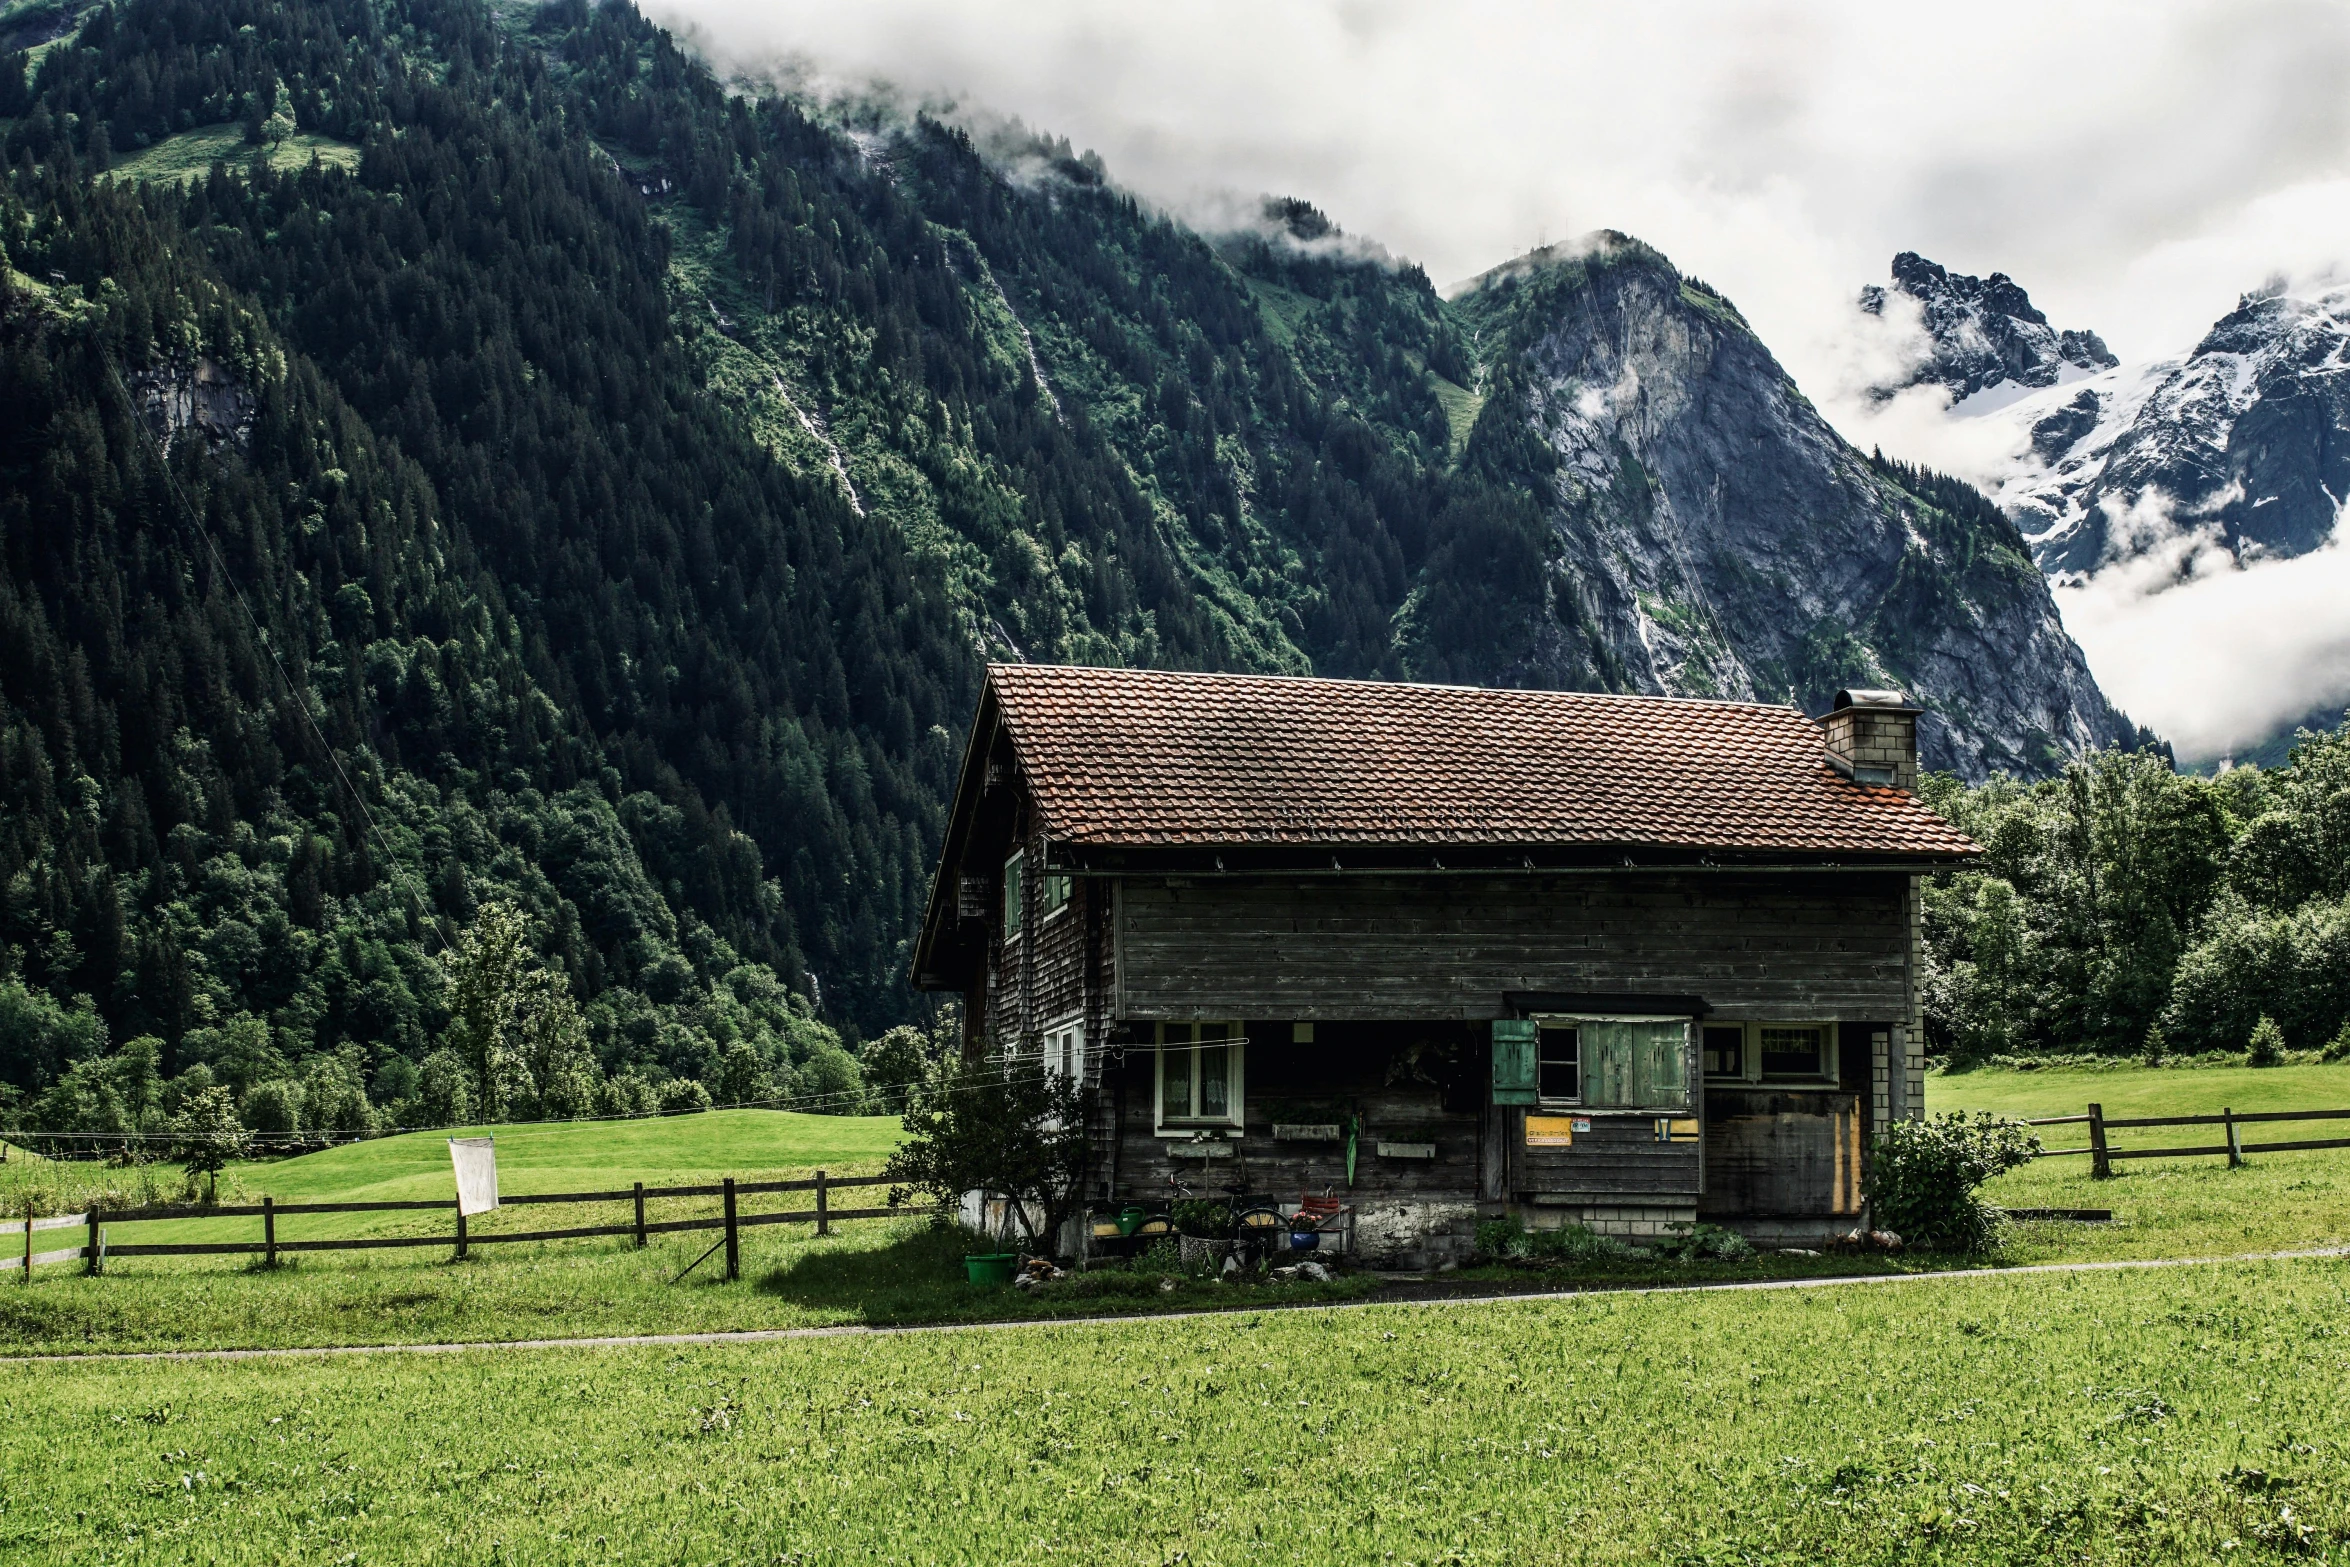 a house in a field with mountains in the background, by Sebastian Spreng, pexels contest winner, chalet, lush green, rustic setting, suzanne engelberg